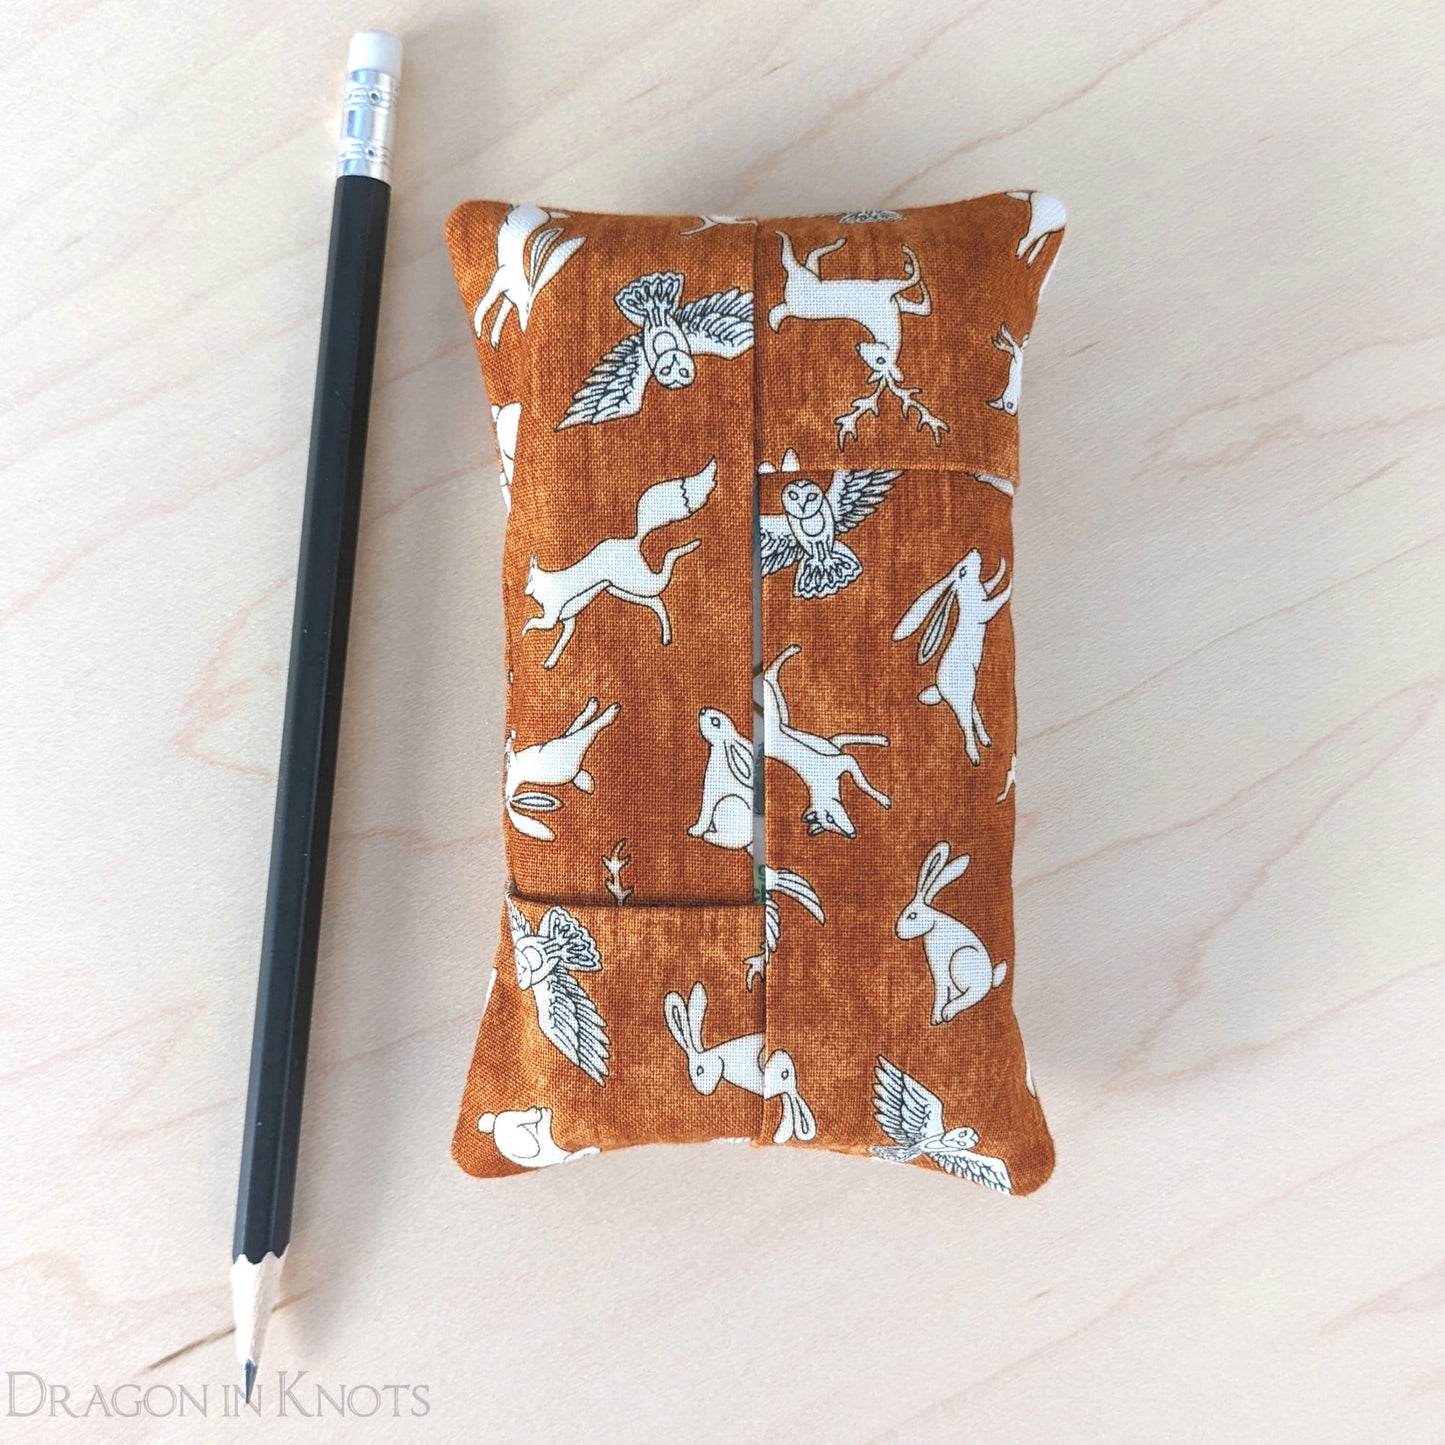 Wild and Wise Pocket Tissue Case - Dragon in Knots